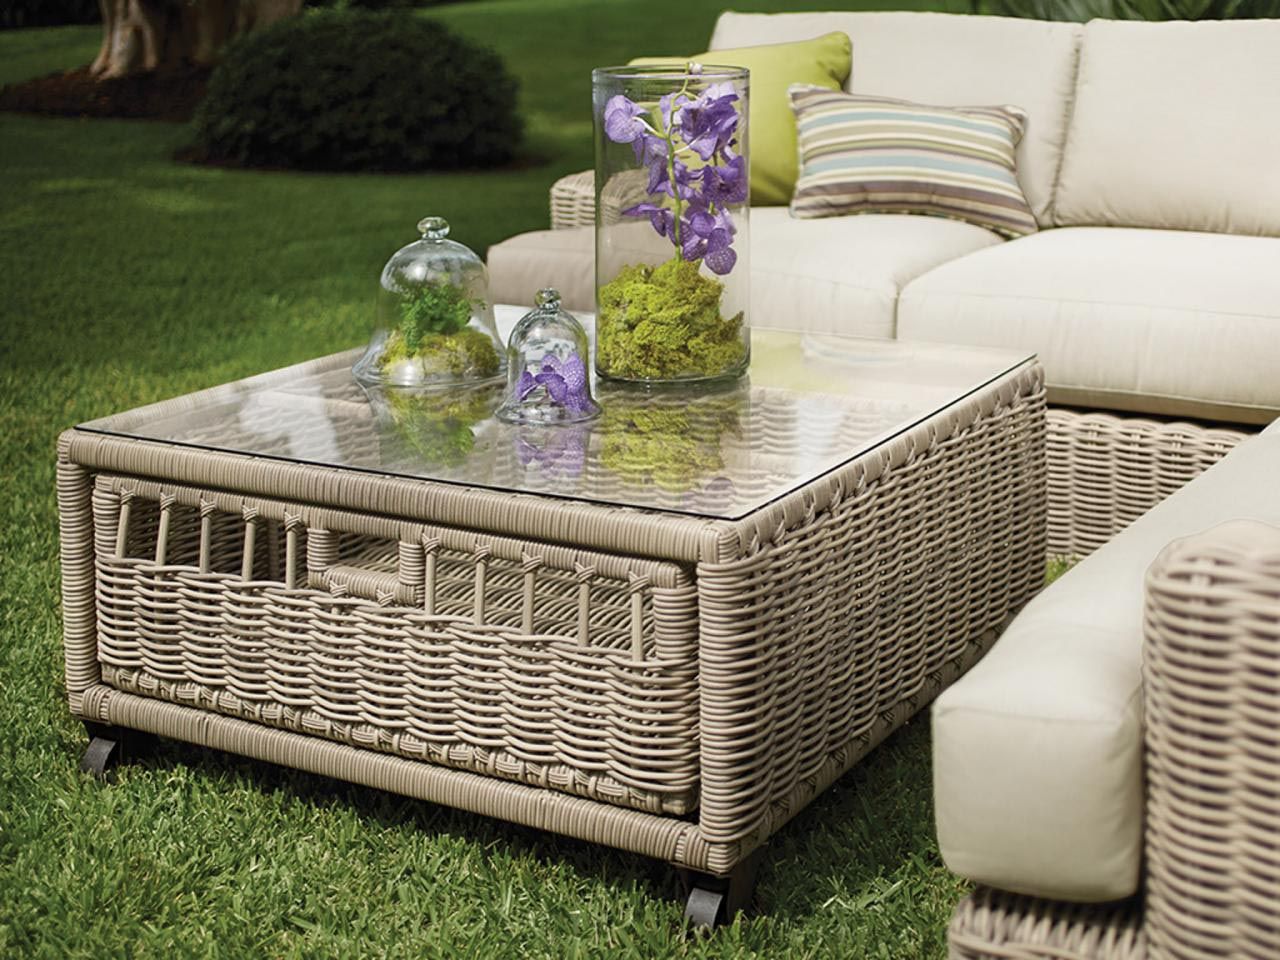 Patio Coffee Table With Storage | Coffee Table Design Ideas Intended For Outdoor Coffee Tables With Storage (Gallery 11 of 20)